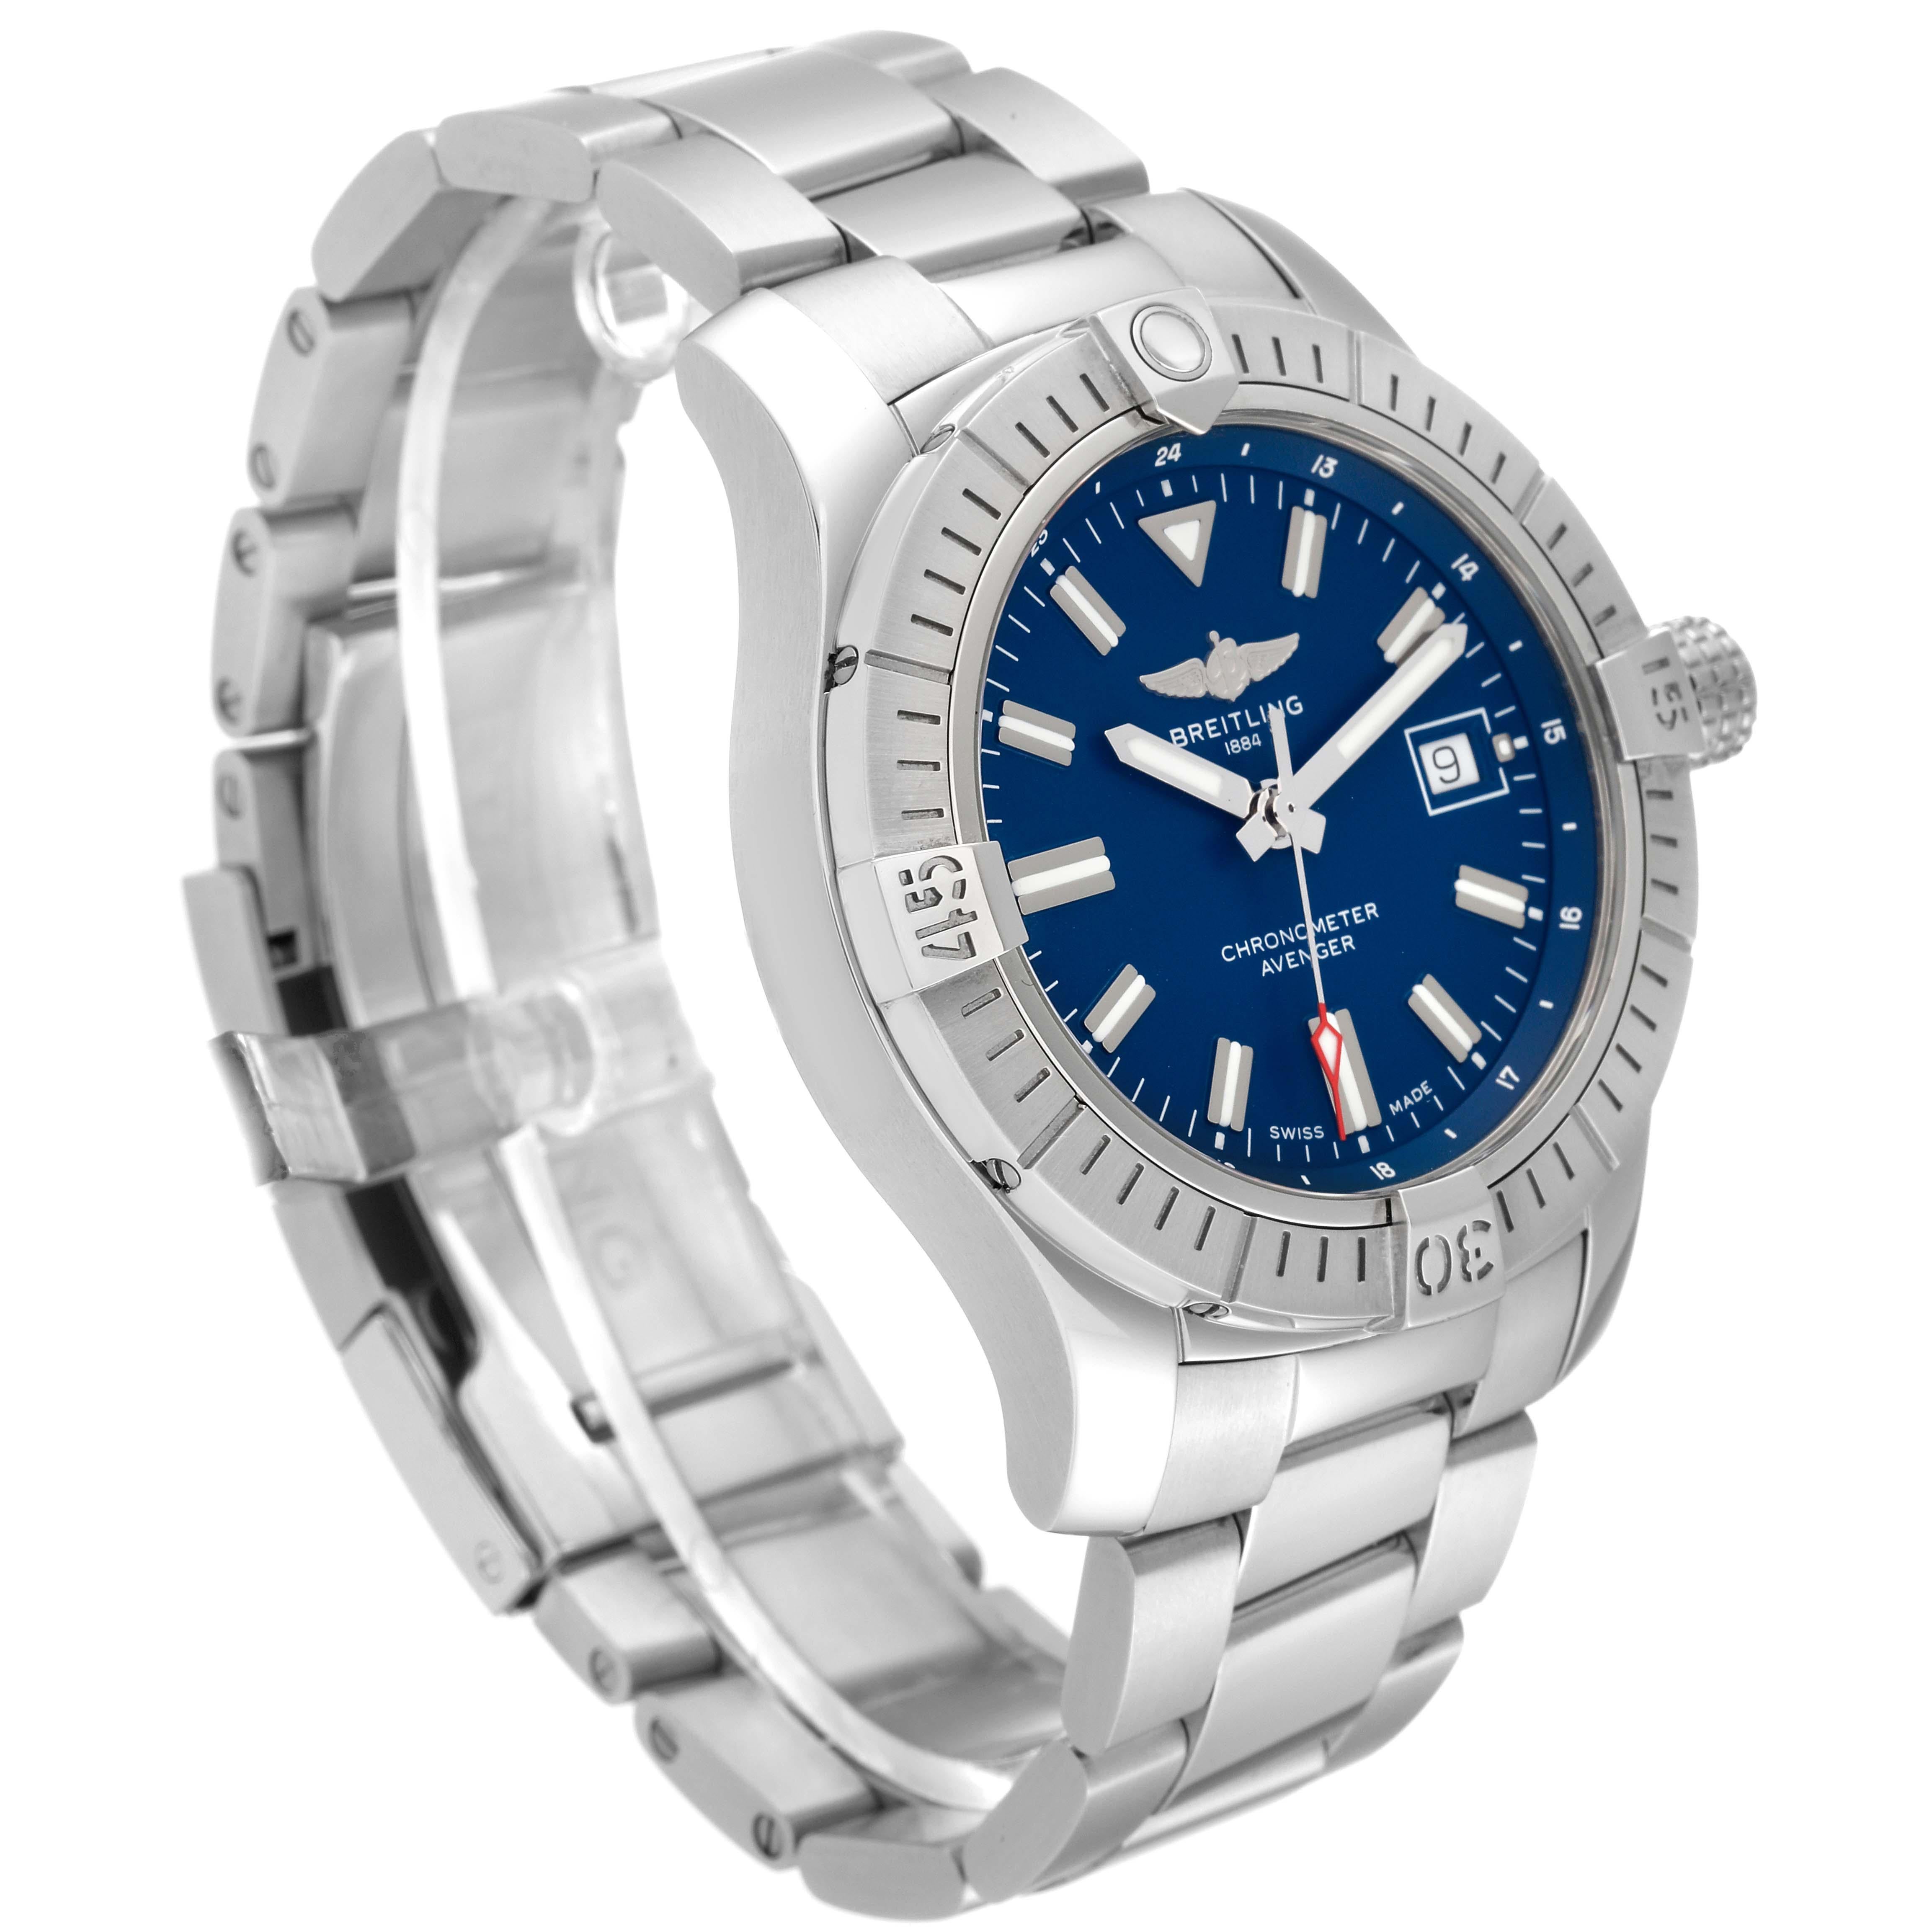 Breitling Avenger Blue Dial Stainless Steel Mens Watch A17318 Box Card In Excellent Condition For Sale In Atlanta, GA